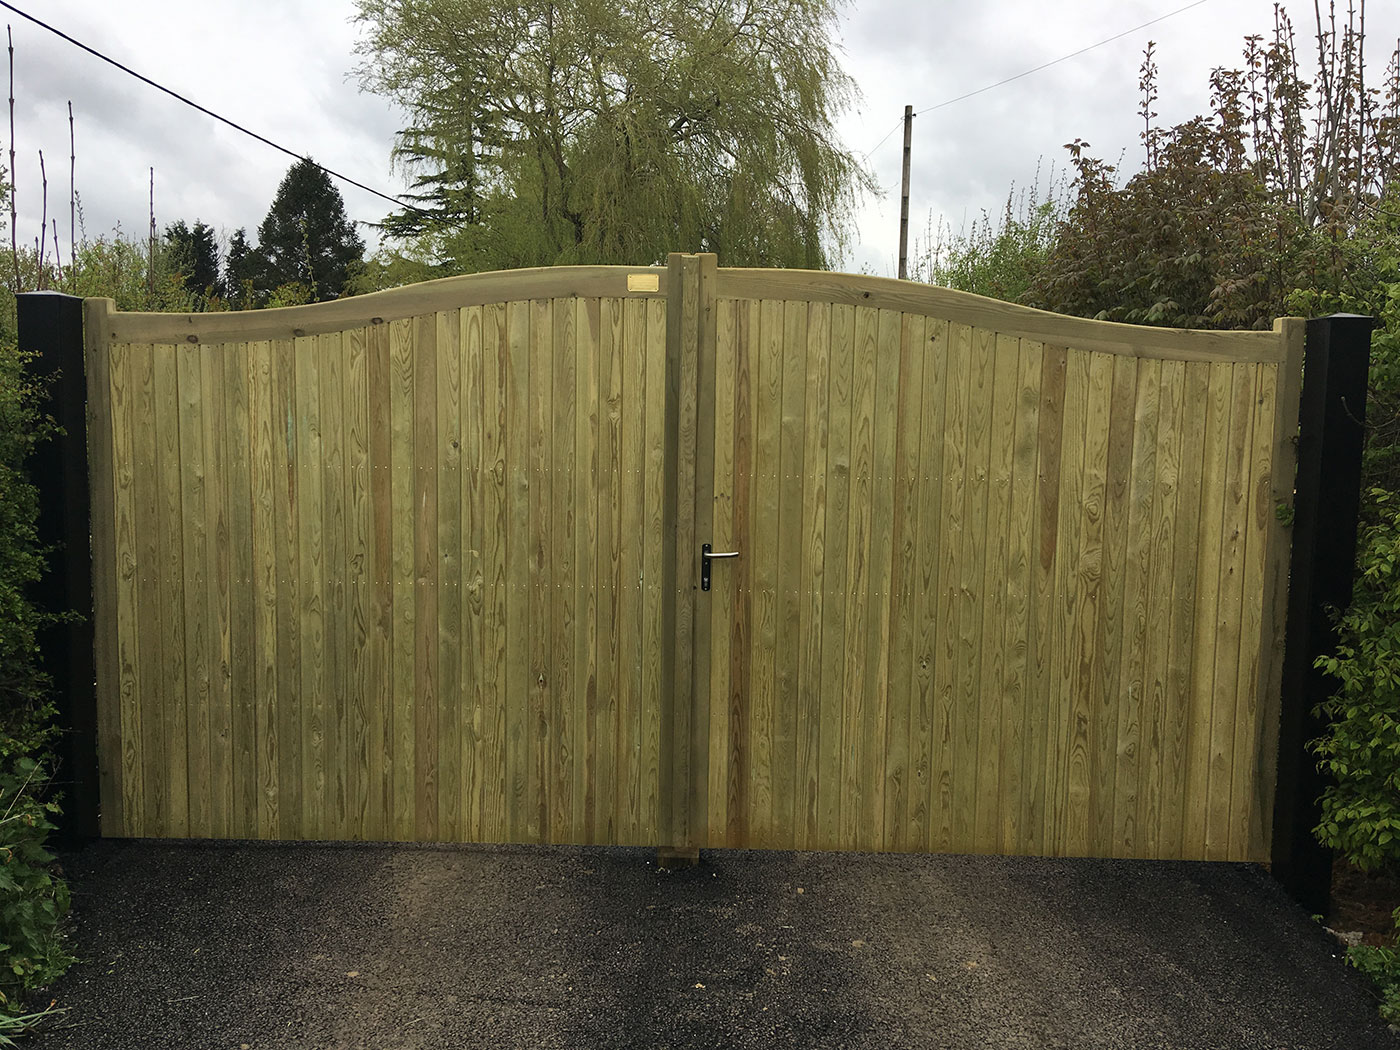 Courtyard gates by Vincent Fencing